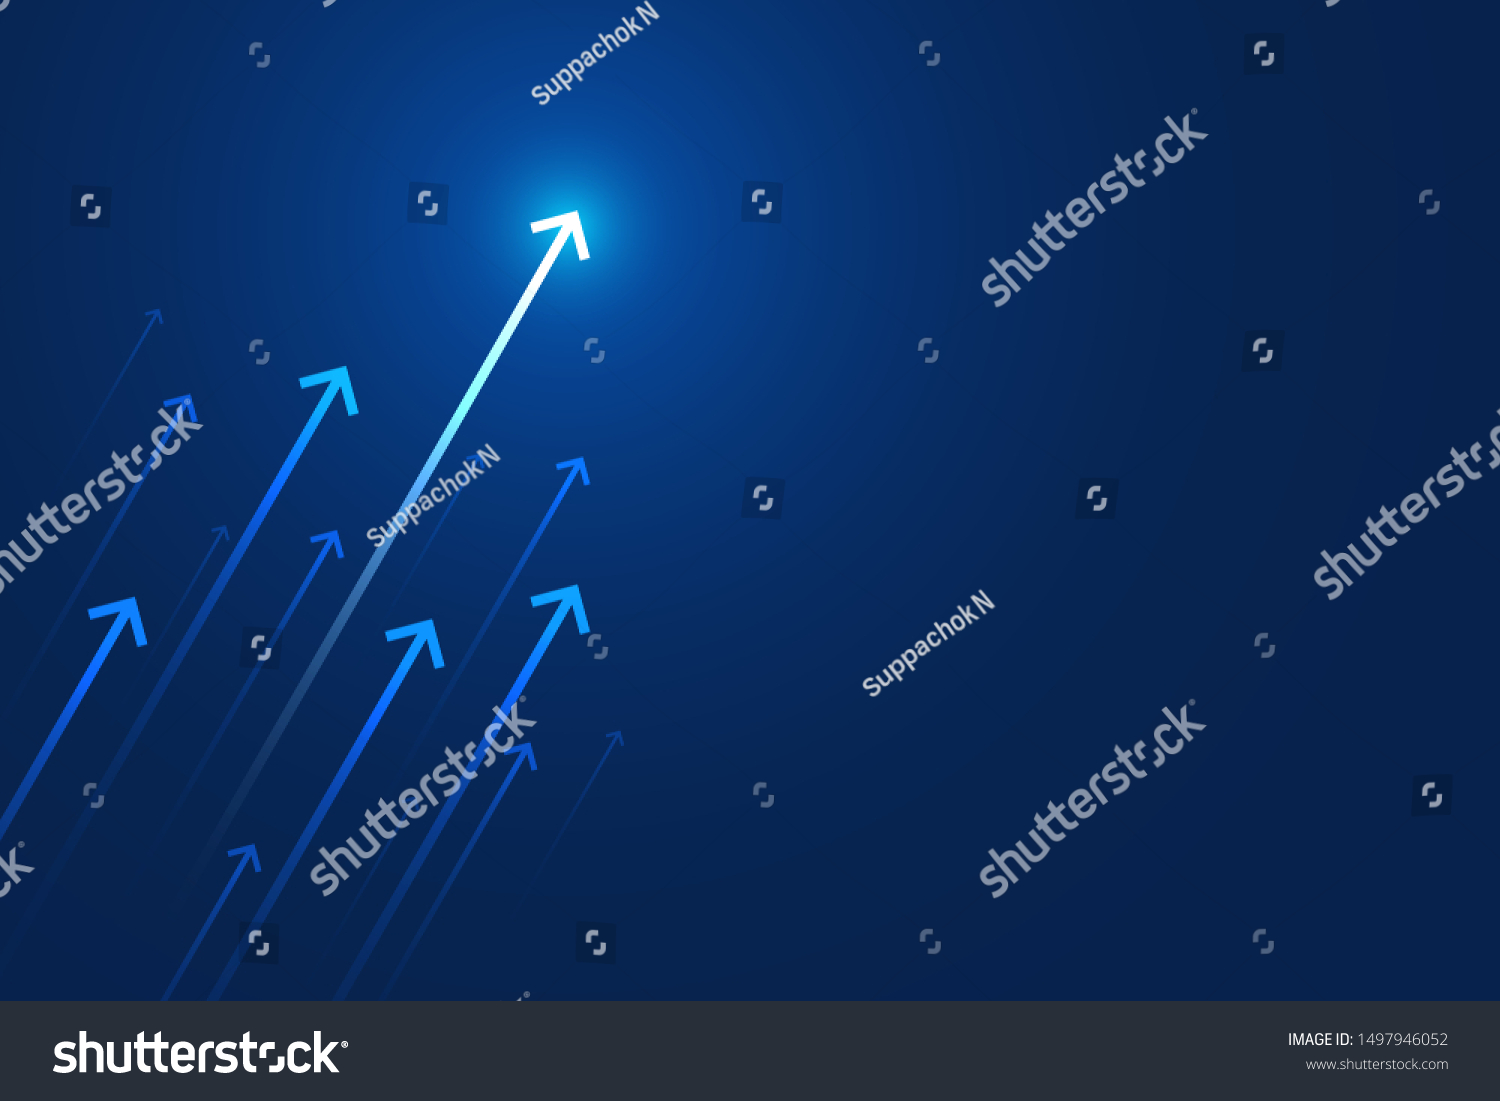 Arrow up on blue background, copy space composition, business growth concept.